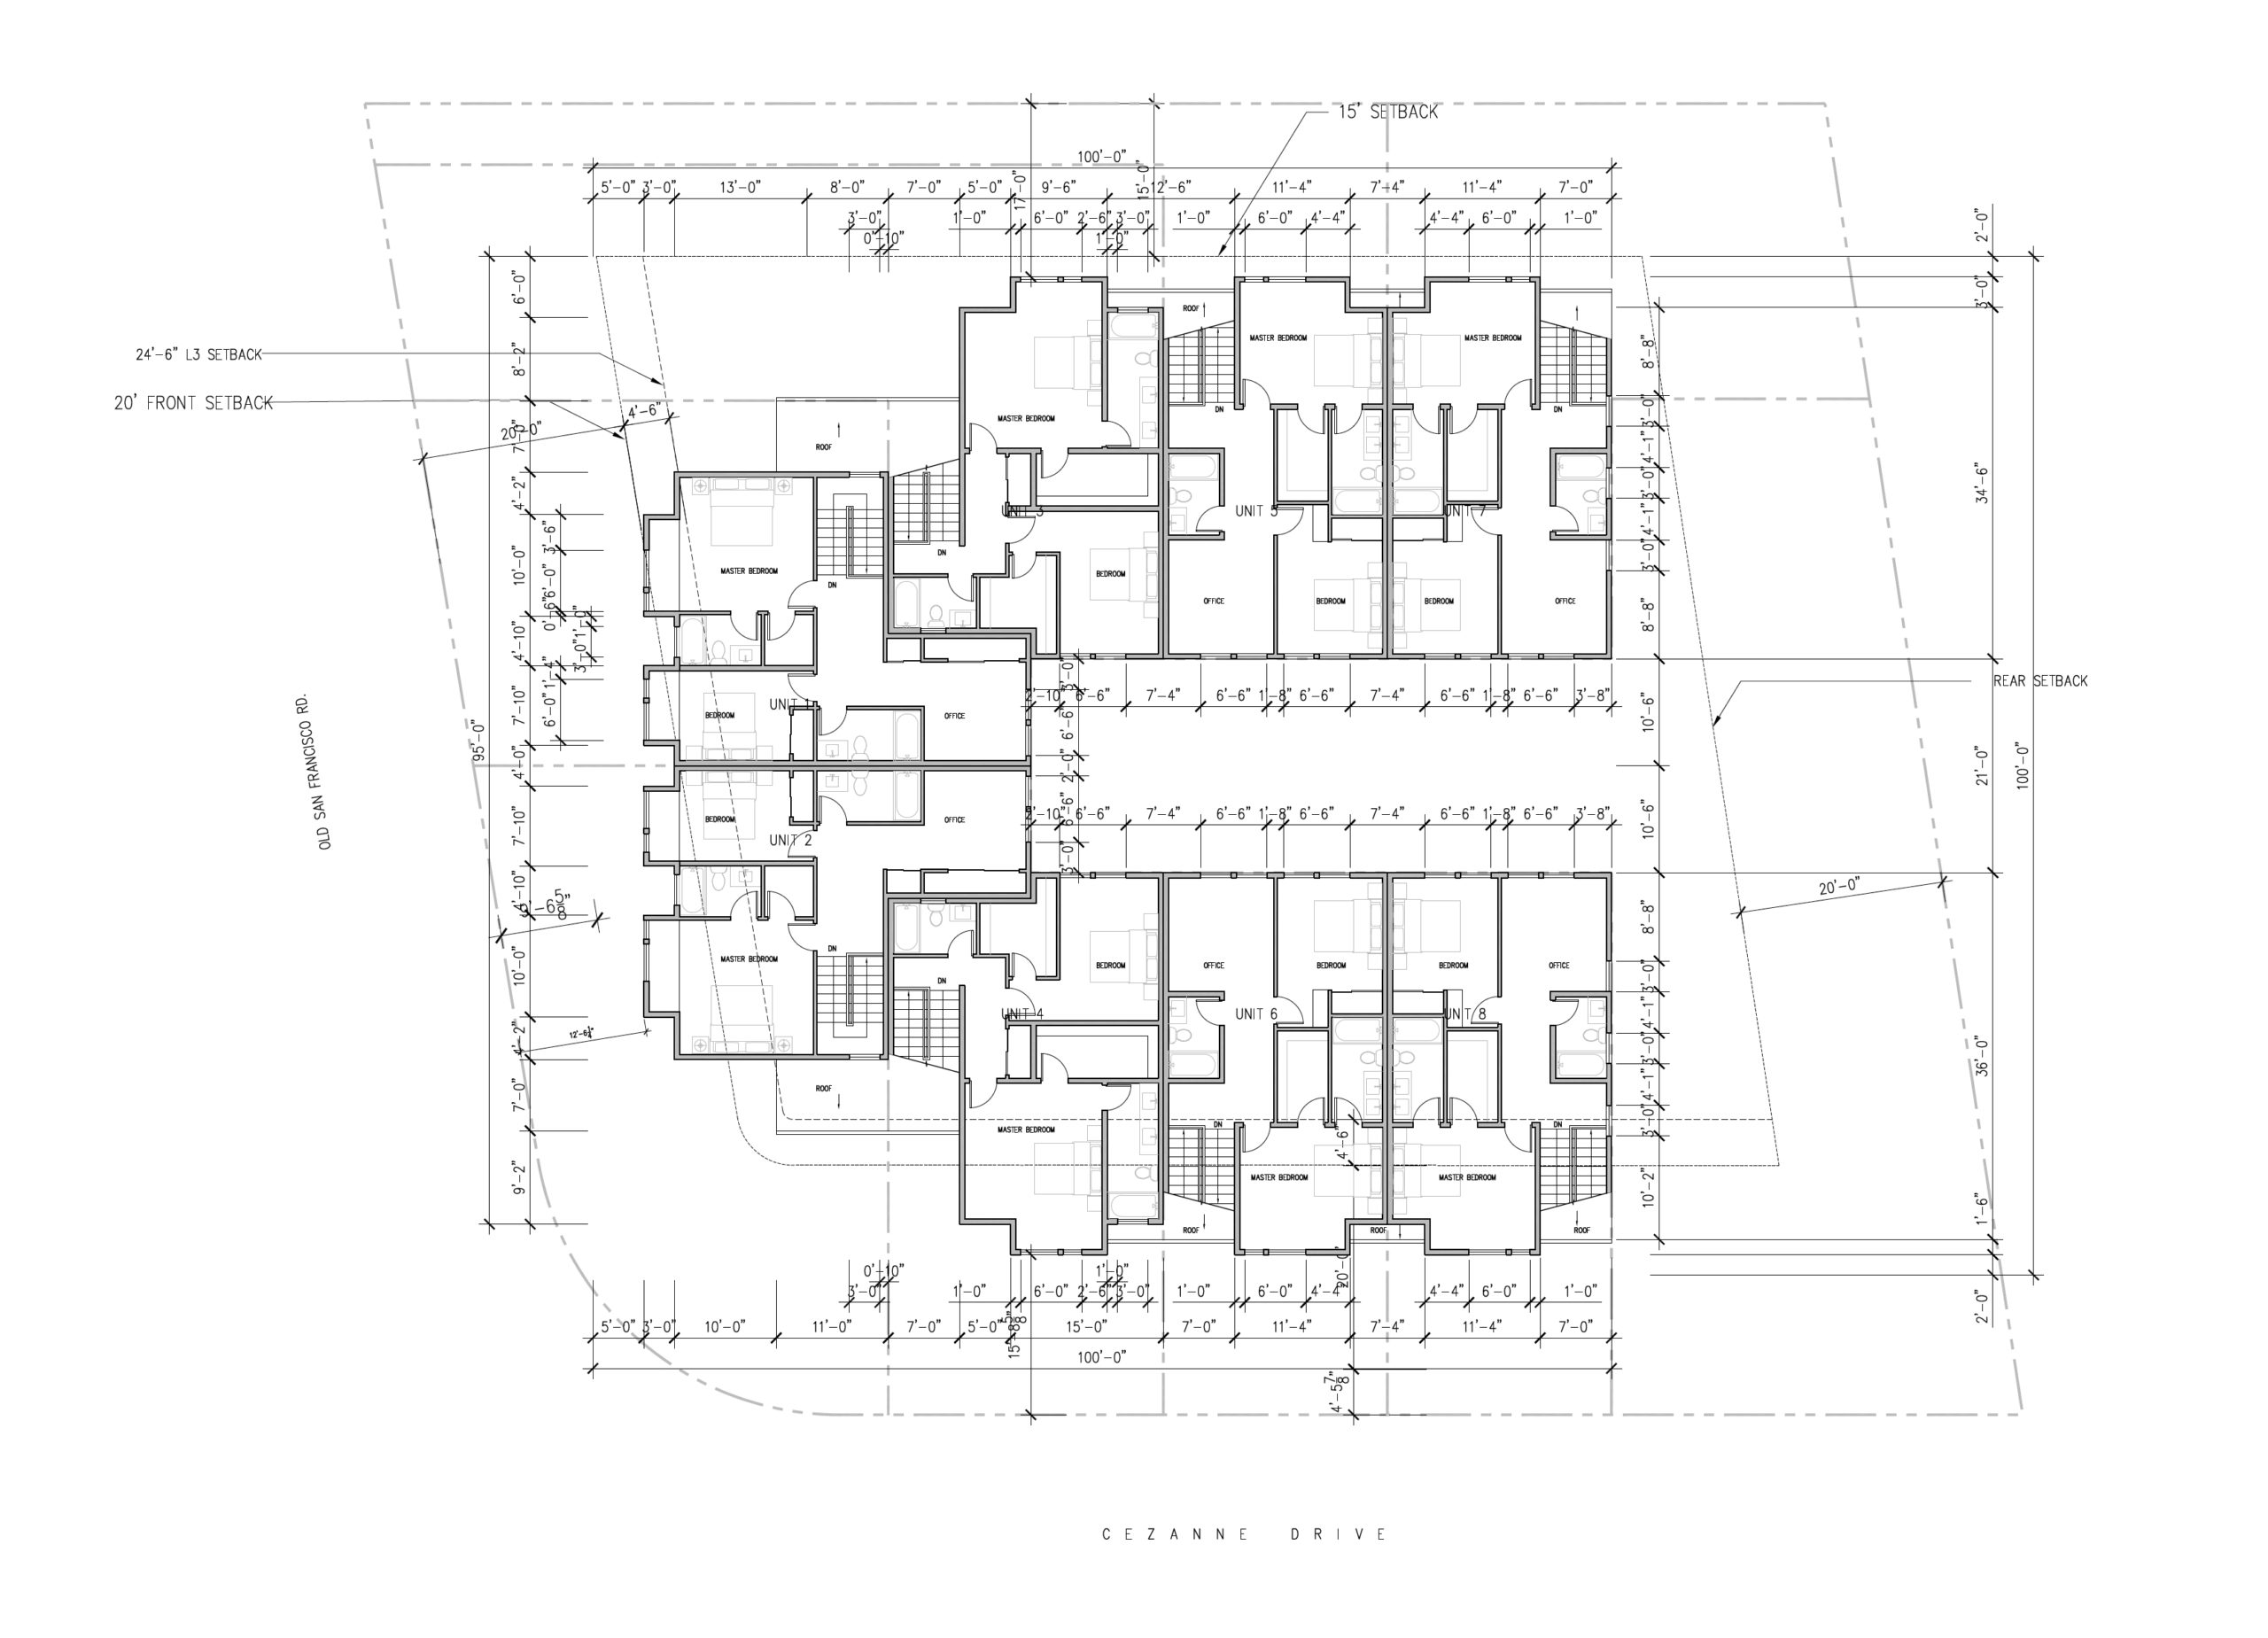 444 Old San Francisco Road third-level floor plans, rendering by ZSD Architects